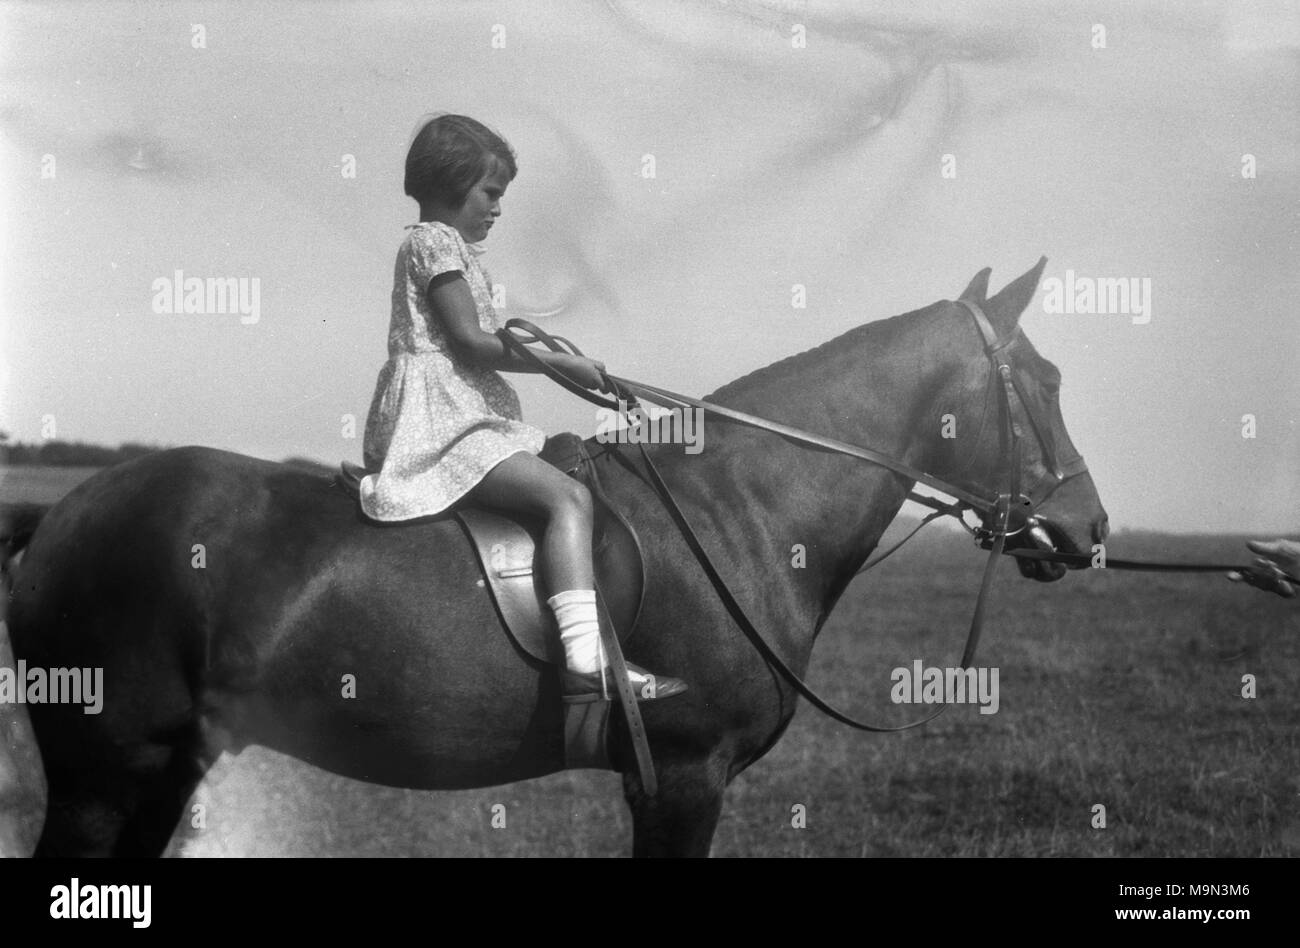 1920s, historical picture, rural life in England, before the arrival on mass of the motorcar, meant that most youngsters living in the country side learnt to ride horses from an early age and here we see a young girl doing exactly that. Wearing a dress, she is sitting on and holding the reins of a large horse. Stock Photo